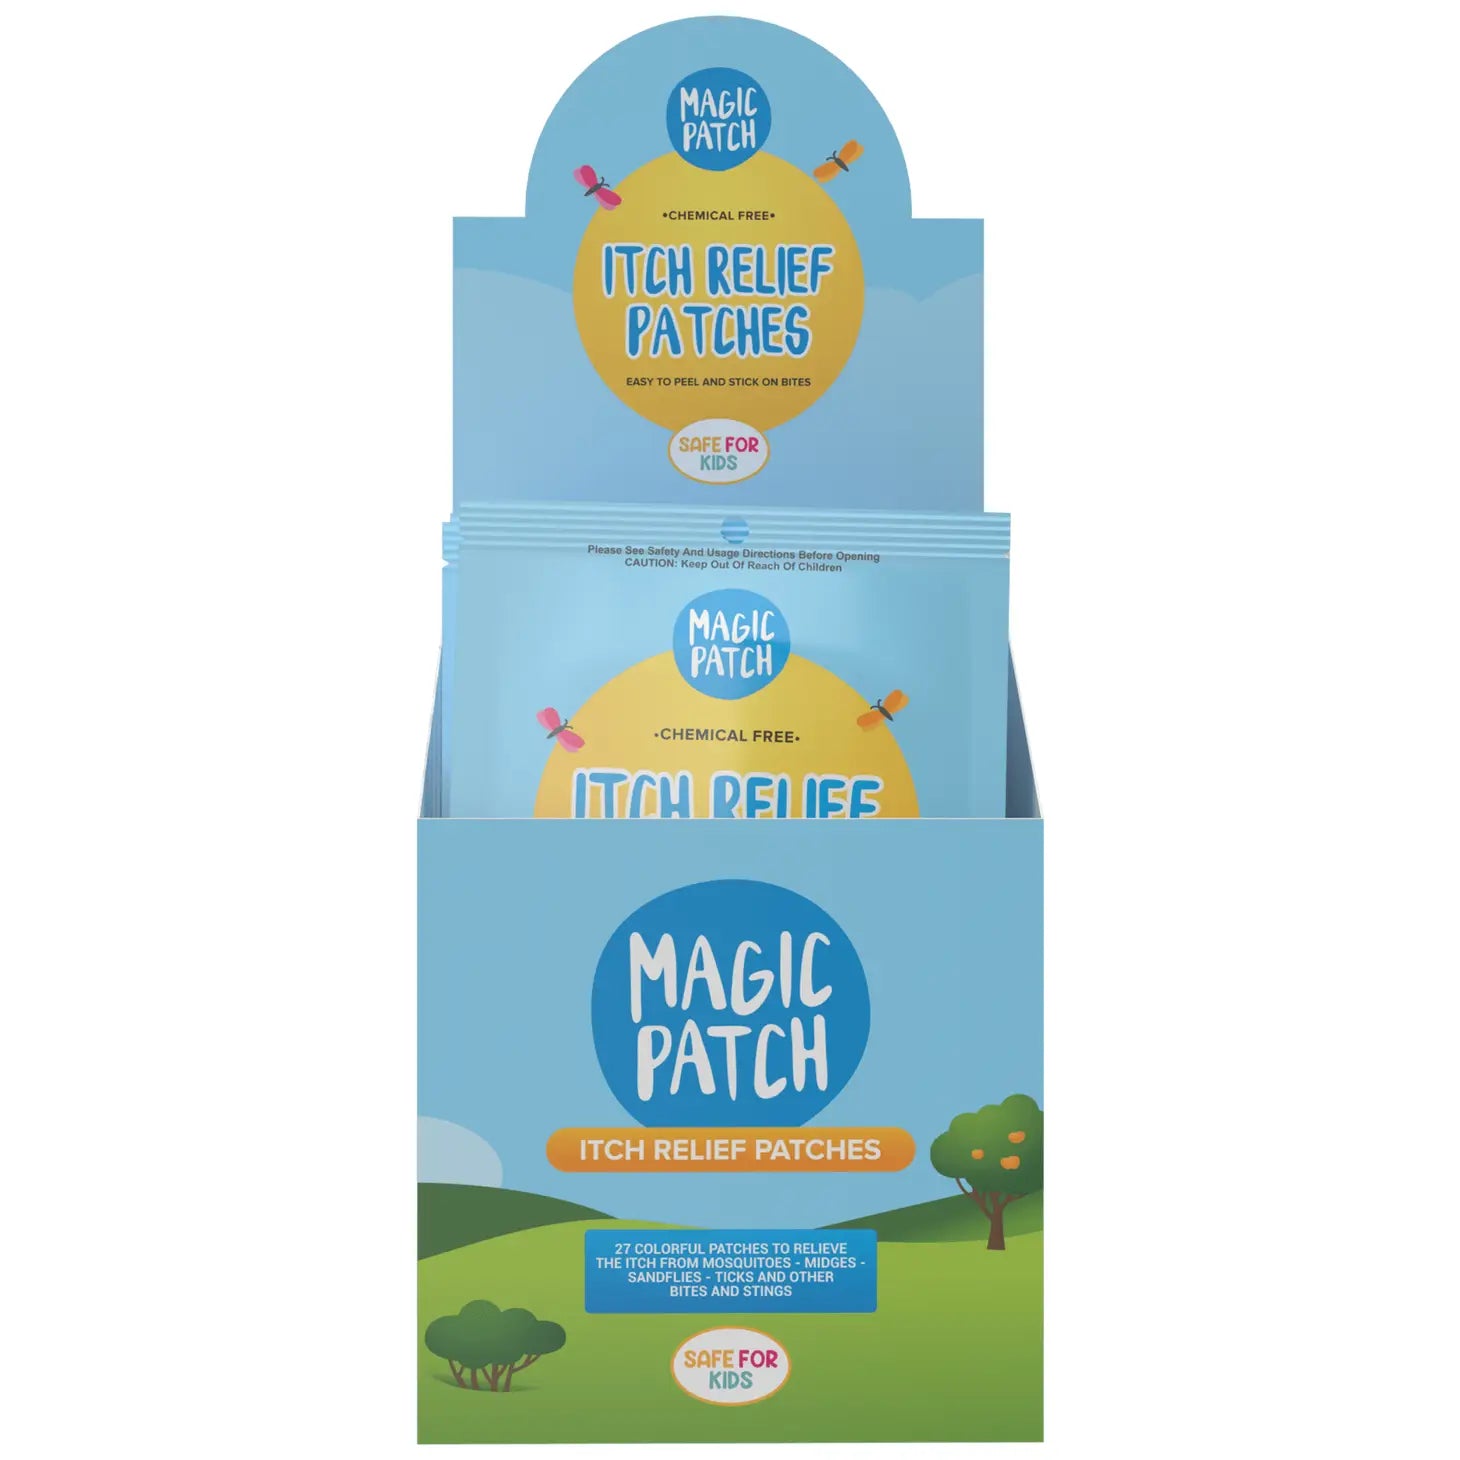 Magic patch bug itch relief patches